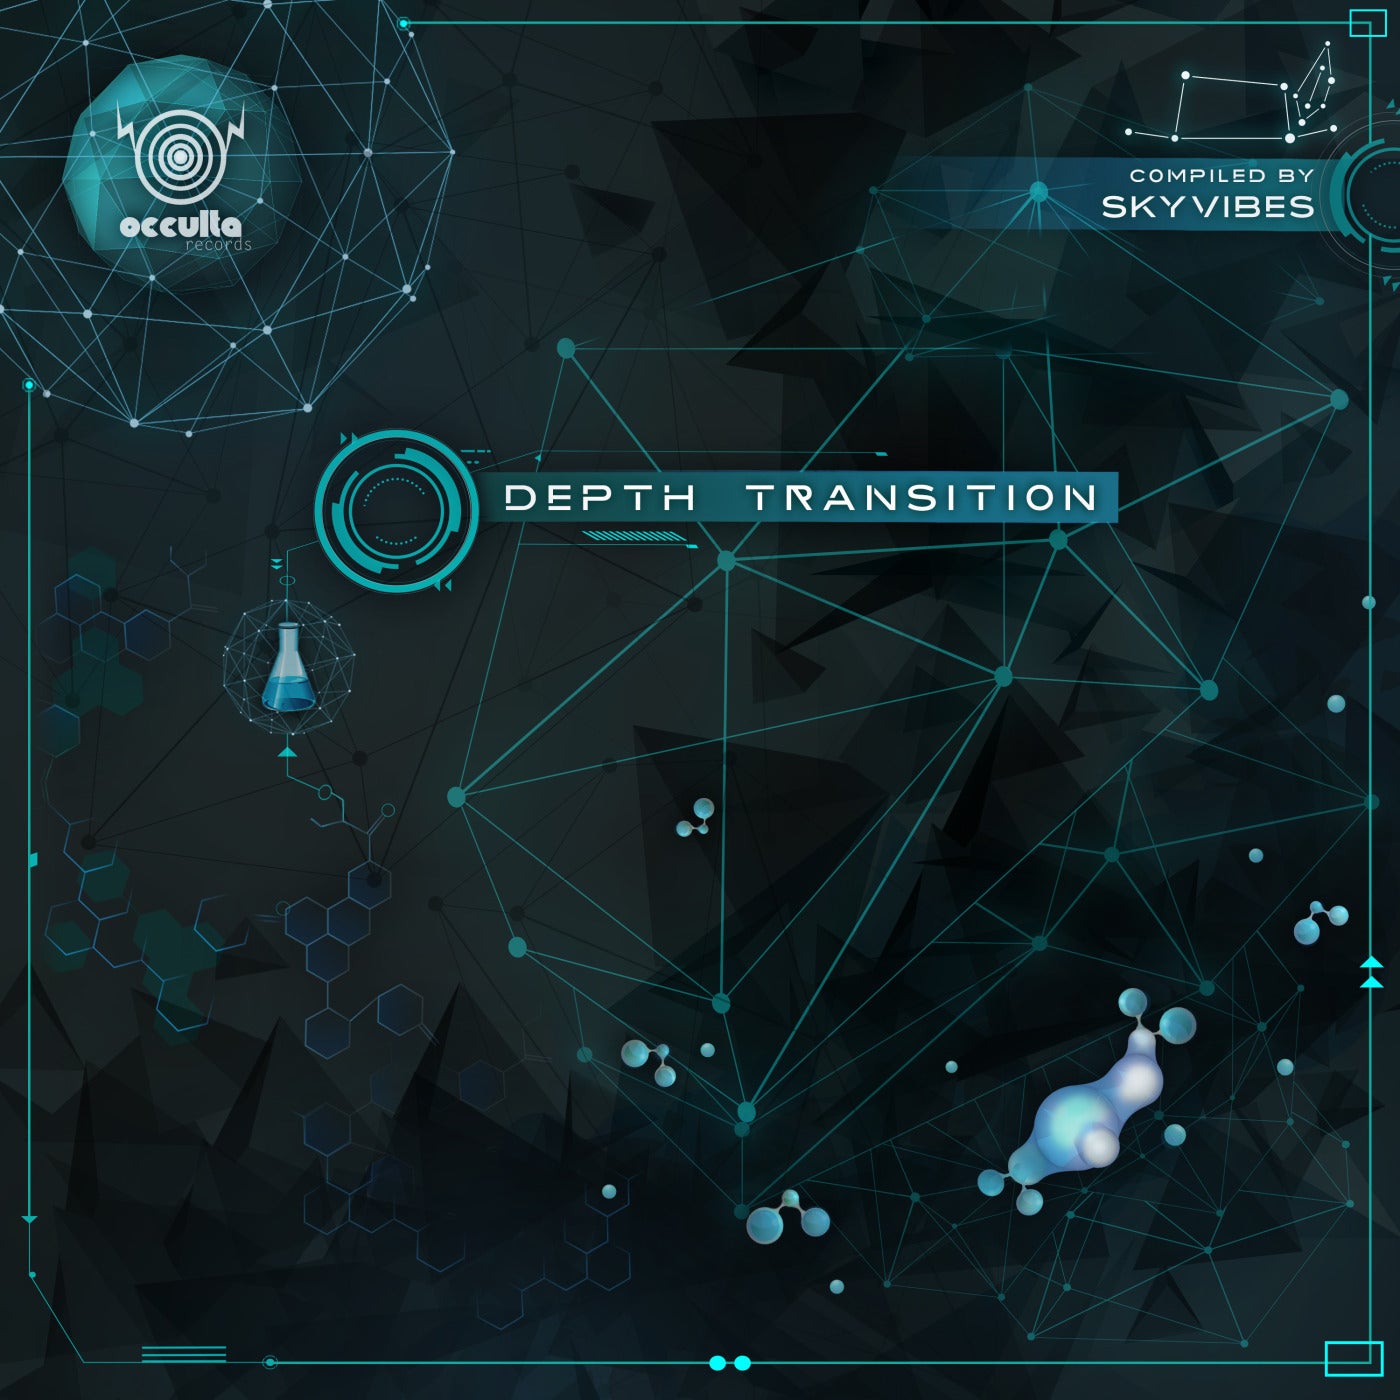 Depth Transition Compiled by SkyVibes